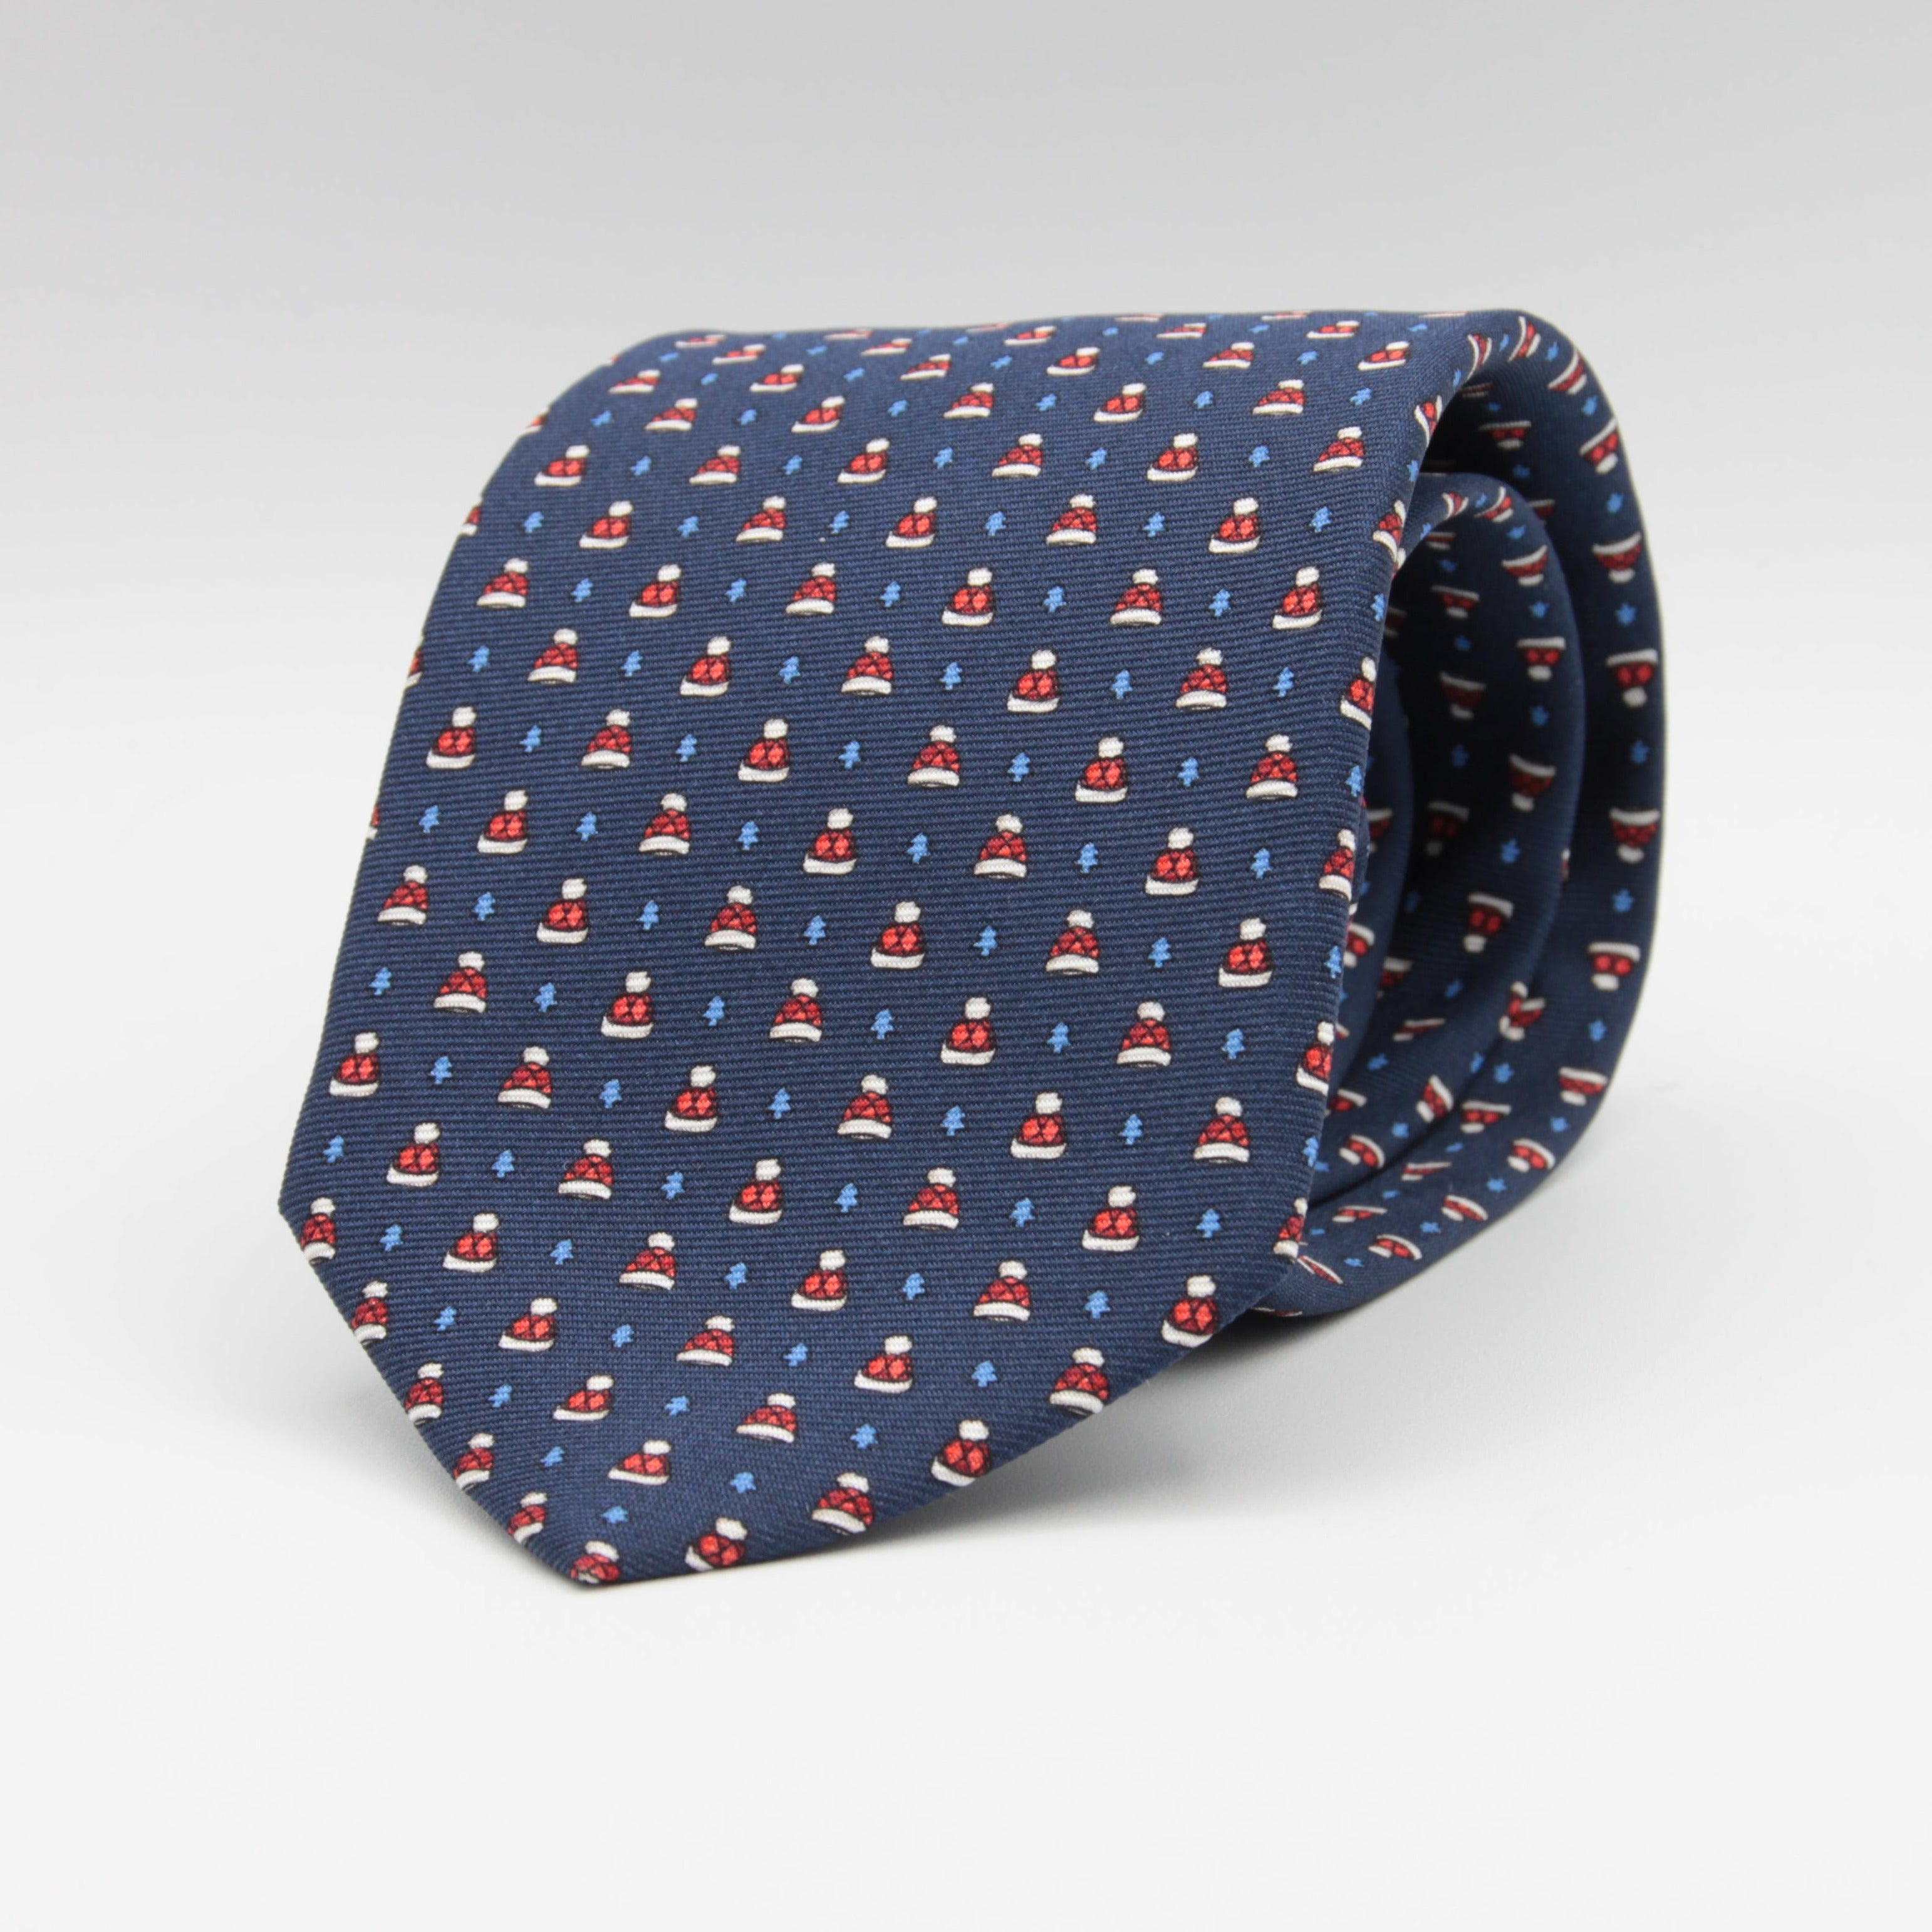 Holliday & Brown for Cruciani & Bella 100% printed Silk Self tipped Blue with Red caps tie Handmade in Italy 8 cm x 150 cm #1531